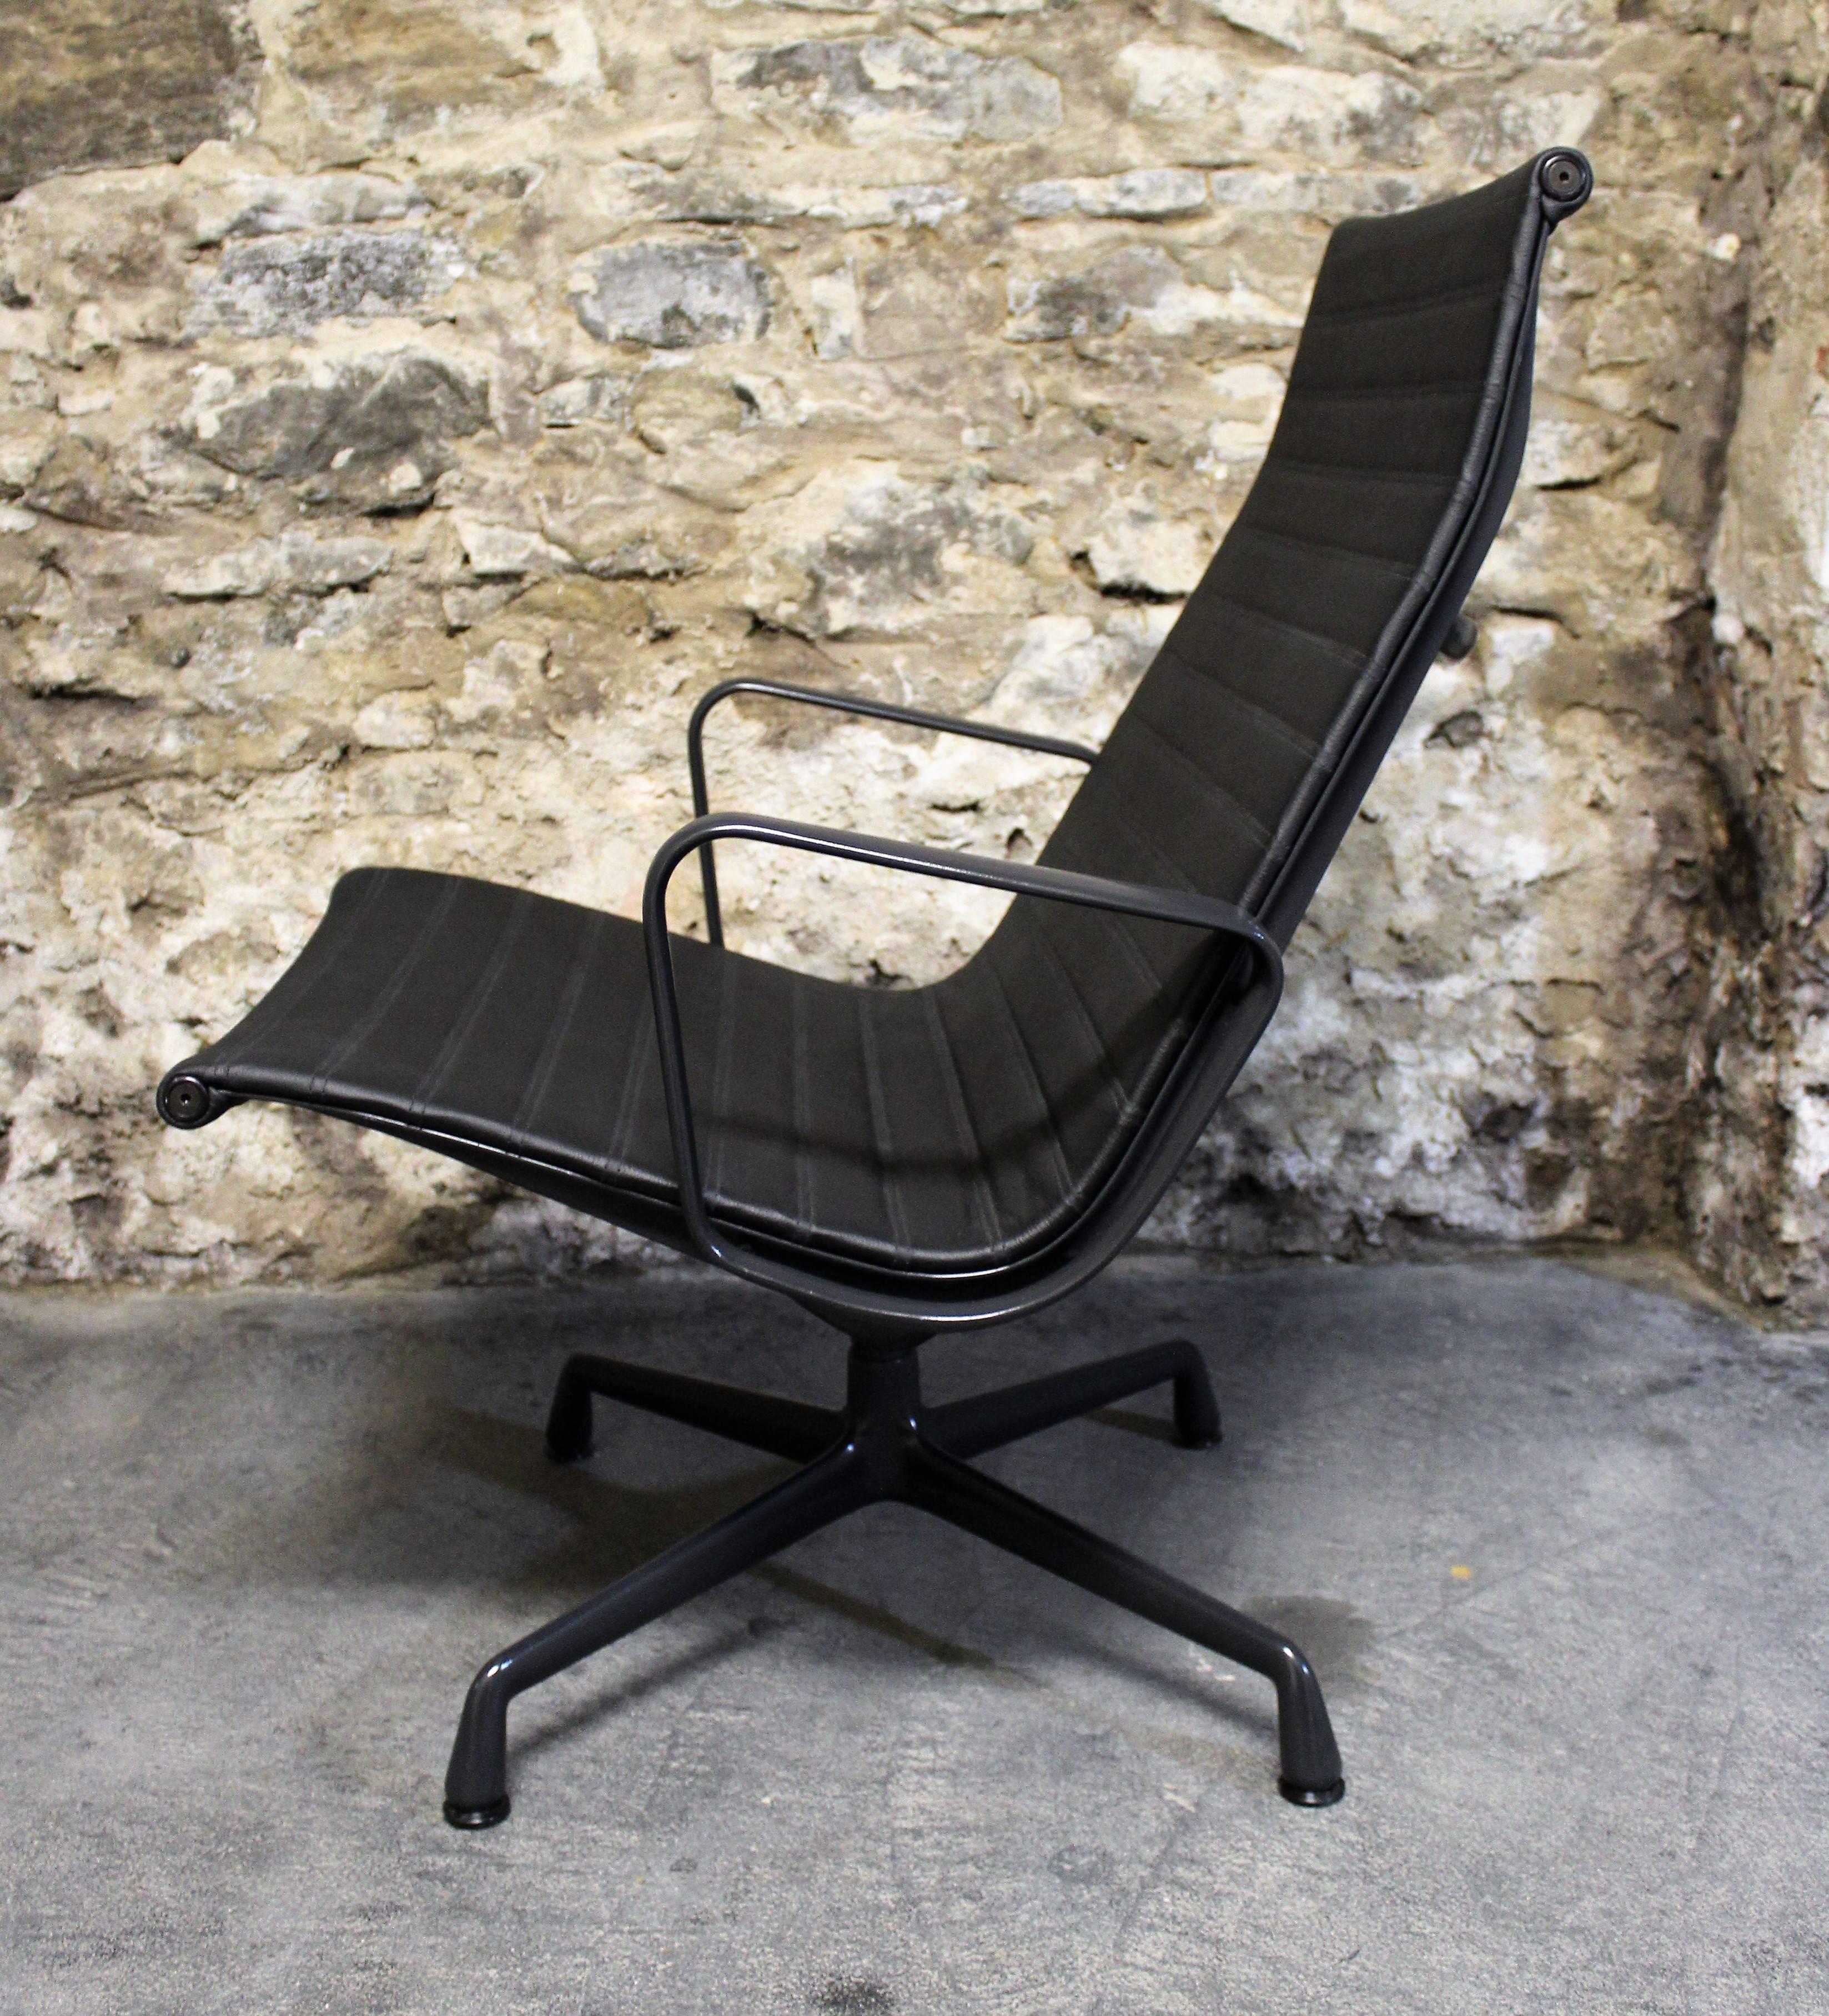 American Mid-Century Classic swivel lounge chair designed by Charles & Ray Eames for Herman Miller. This has been completely restored and re-upholstered in black leather.